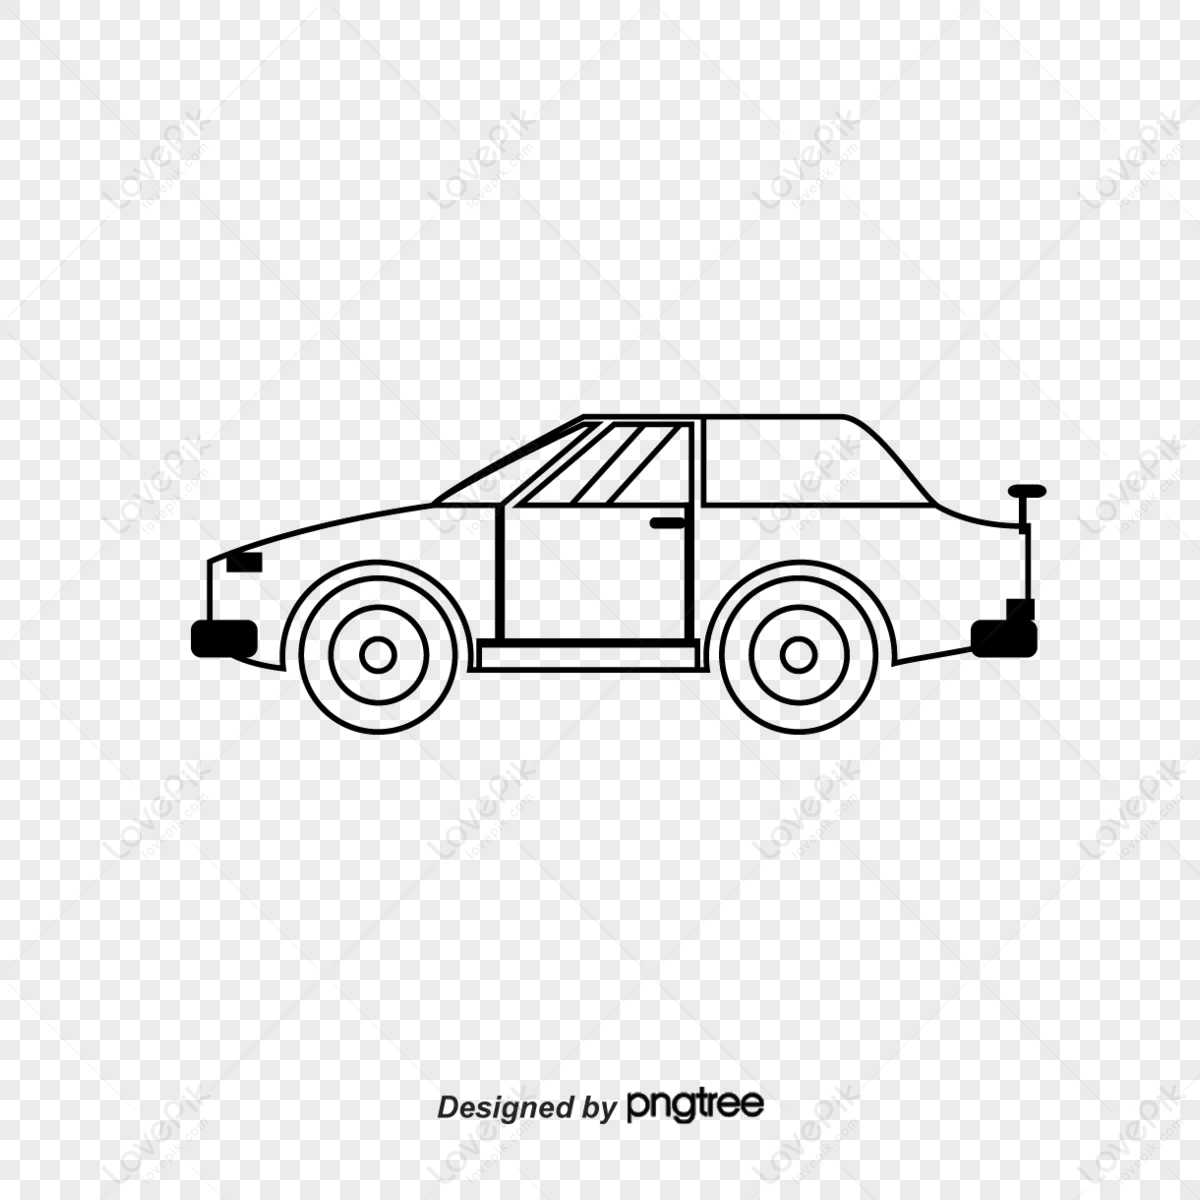 Car Outline Vector Images (over 180,000)